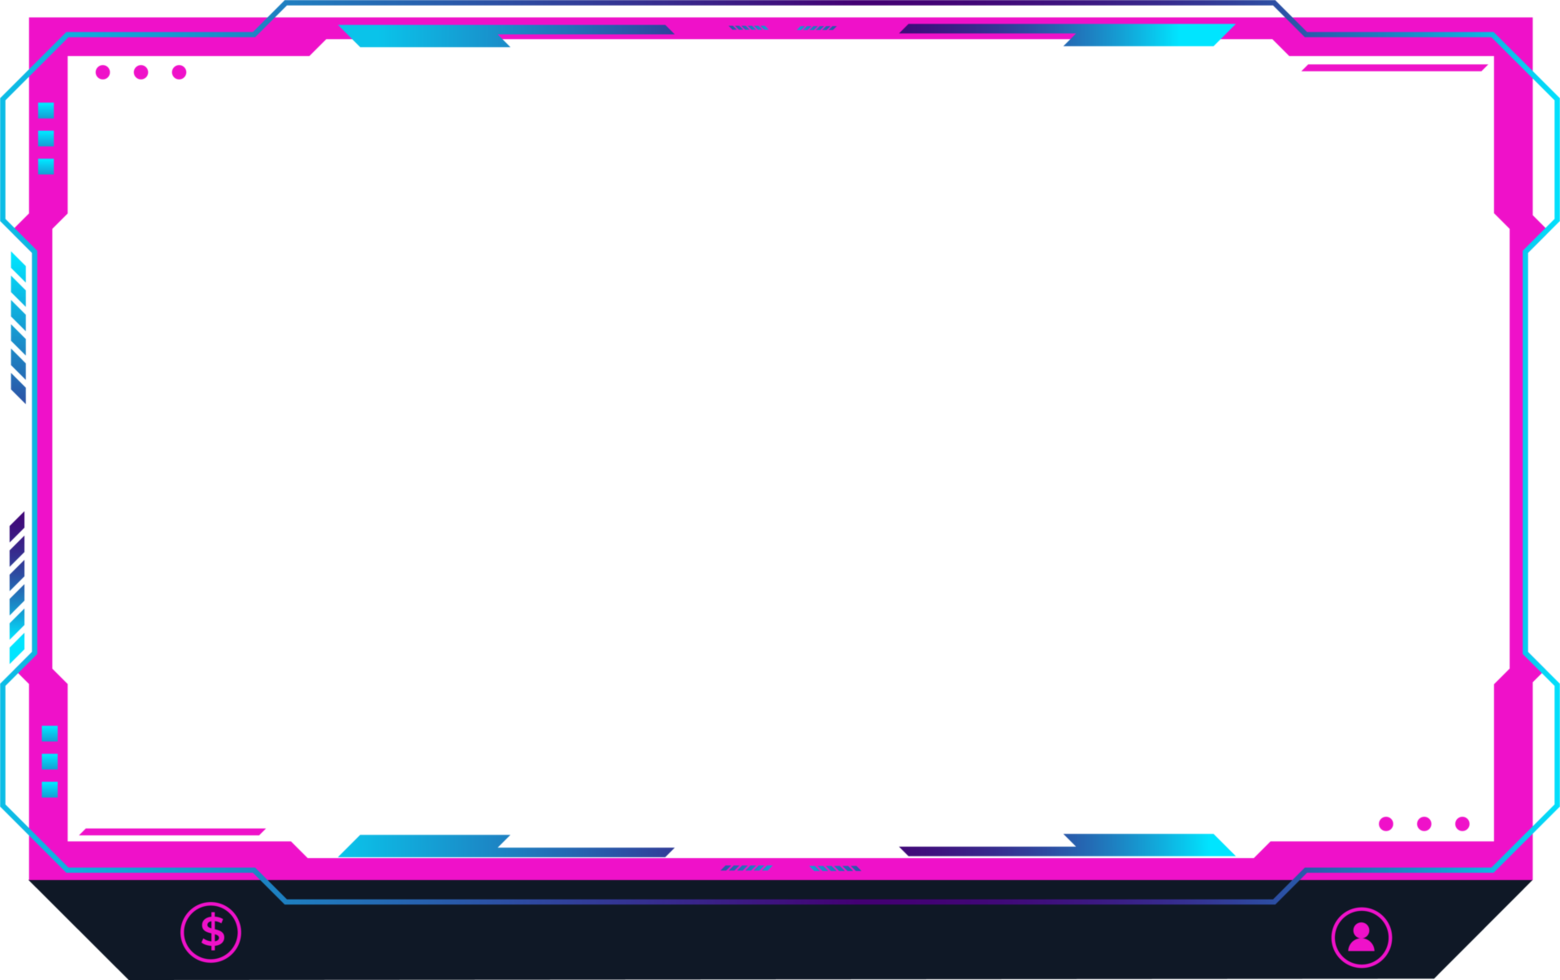 Live streaming overlay decoration with girly pink and blue colors. Live broadcast elements with colorful buttons. Online gaming screen panel and border PNG for gamers.